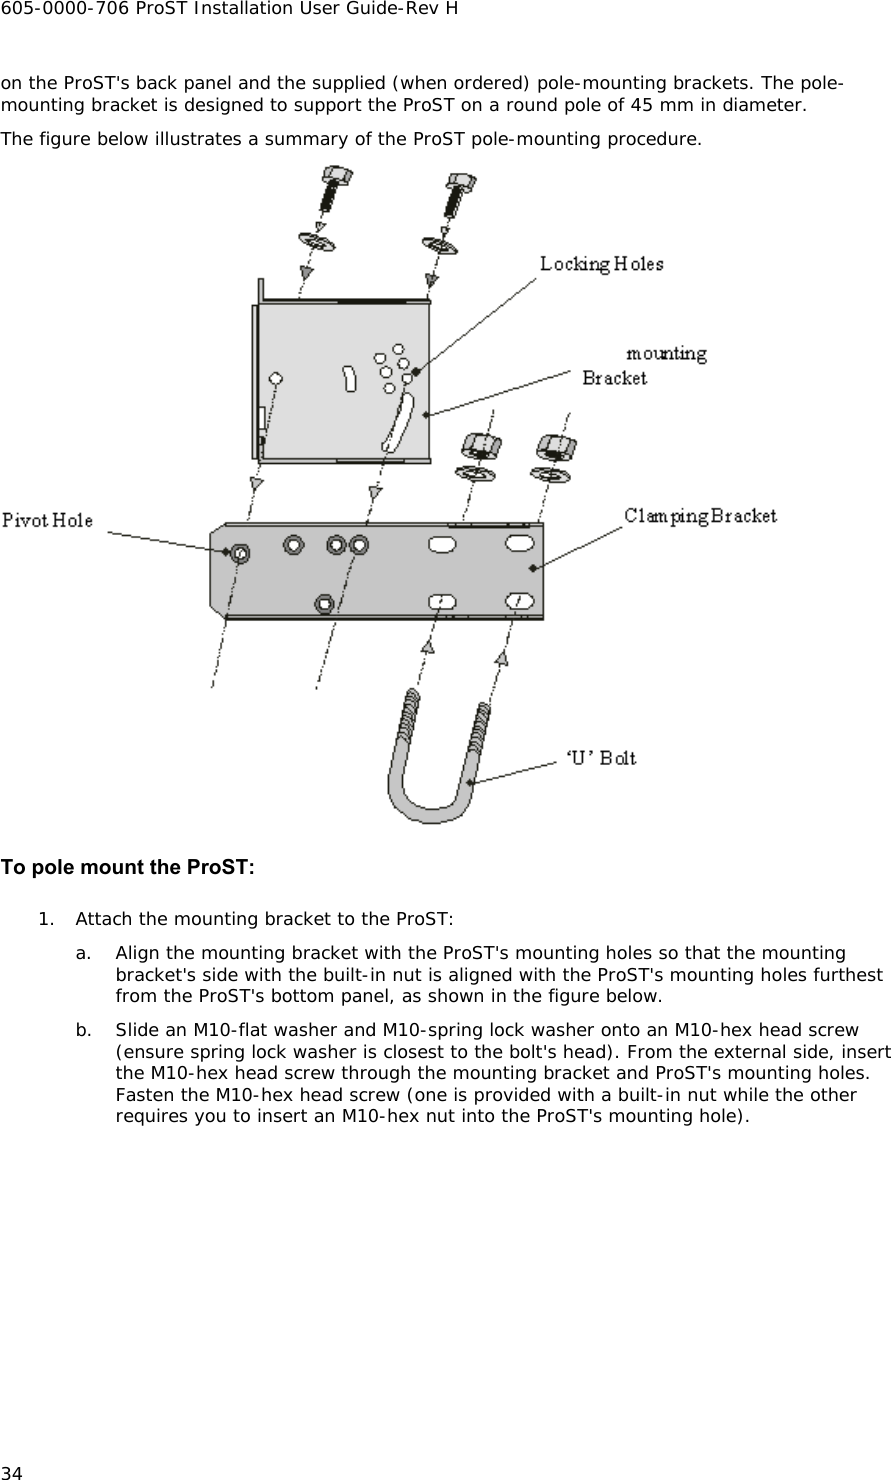 605-0000-706 ProST Installation User Guide-Rev H 34 on the ProST&apos;s back panel and the supplied (when ordered) pole-mounting brackets. The pole-mounting bracket is designed to support the ProST on a round pole of 45 mm in diameter. The figure below illustrates a summary of the ProST pole-mounting procedure.   To pole mount the ProST: 1. Attach the mounting bracket to the ProST: a. Align the mounting bracket with the ProST&apos;s mounting holes so that the mounting bracket&apos;s side with the built-in nut is aligned with the ProST&apos;s mounting holes furthest from the ProST&apos;s bottom panel, as shown in the figure below. b. Slide an M10-flat washer and M10-spring lock washer onto an M10-hex head screw (ensure spring lock washer is closest to the bolt&apos;s head). From the external side, insert the M10-hex head screw through the mounting bracket and ProST&apos;s mounting holes. Fasten the M10-hex head screw (one is provided with a built-in nut while the other requires you to insert an M10-hex nut into the ProST&apos;s mounting hole). 